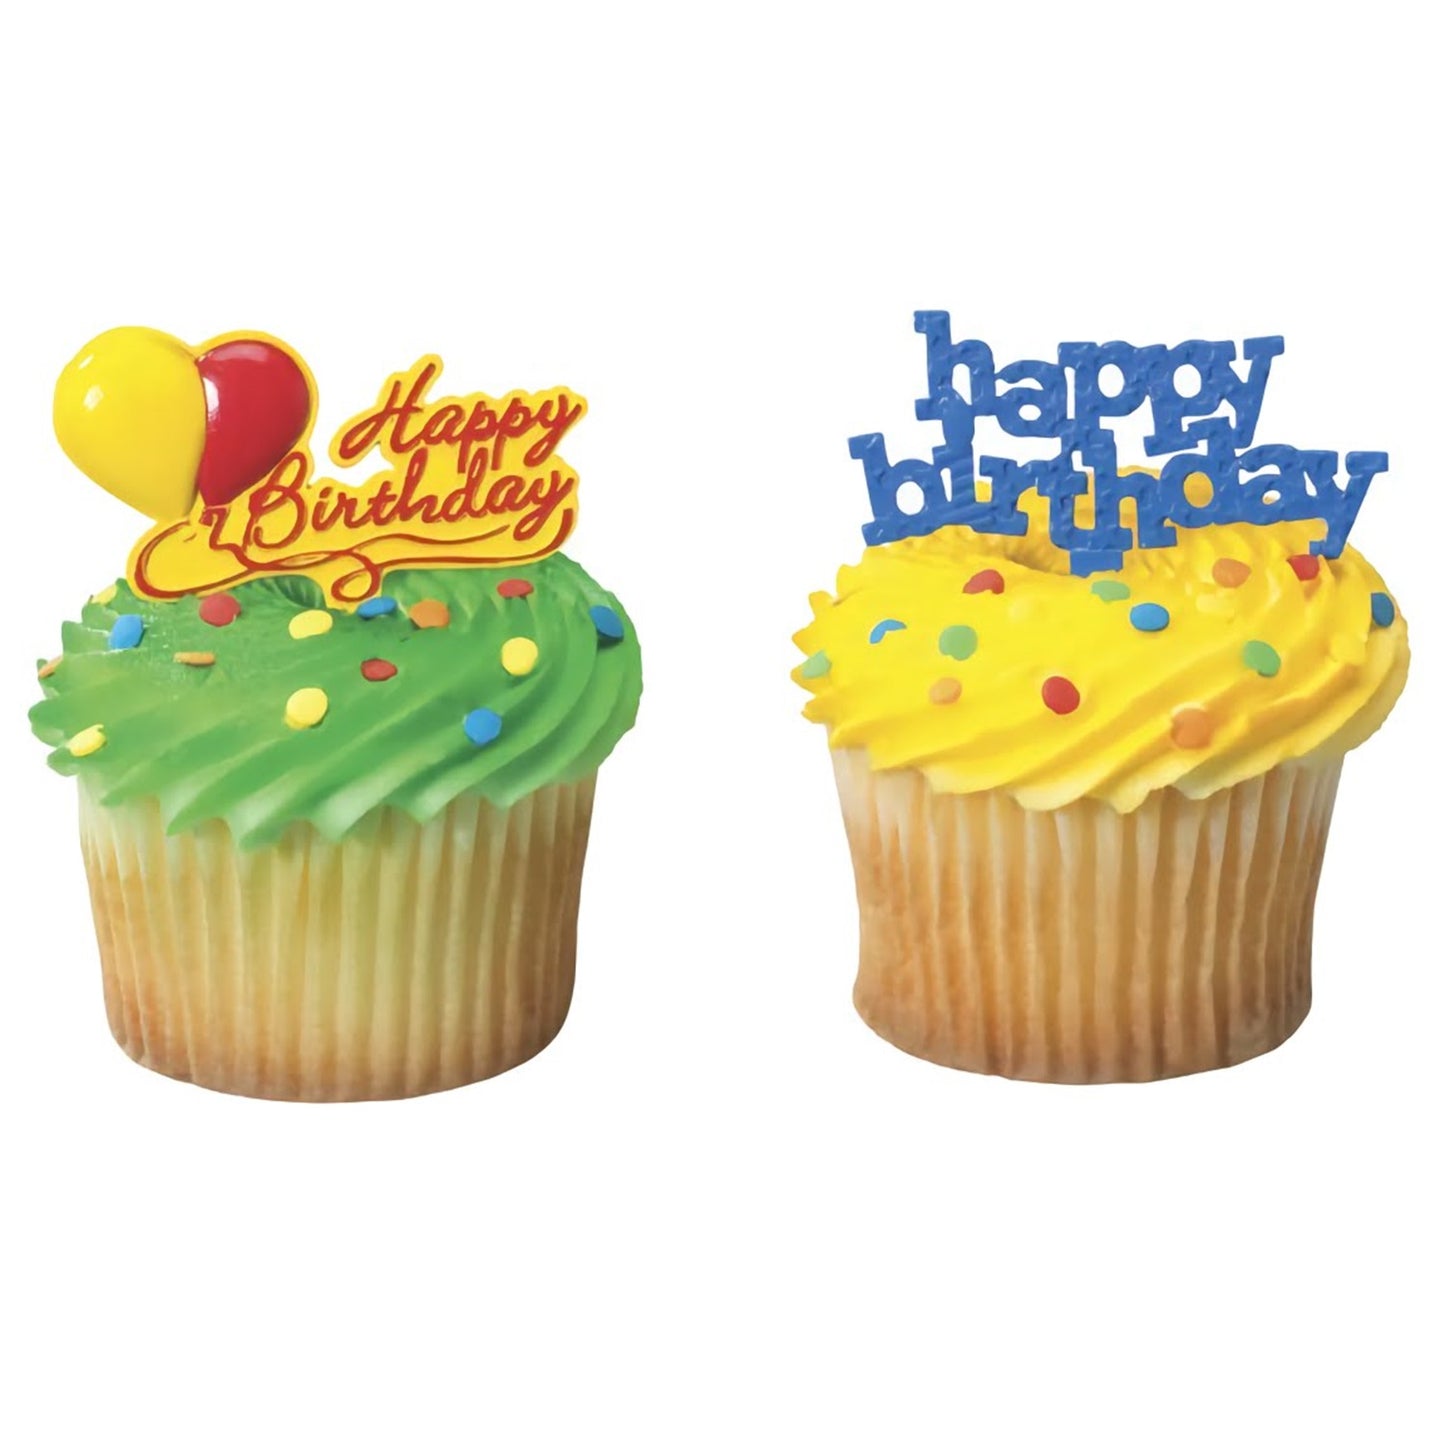 Assorted 'Happy Birthday' cupcake topper picks in various bright colors and bubble lettering, ideal for adding a fun and personalized touch to birthday cupcakes.